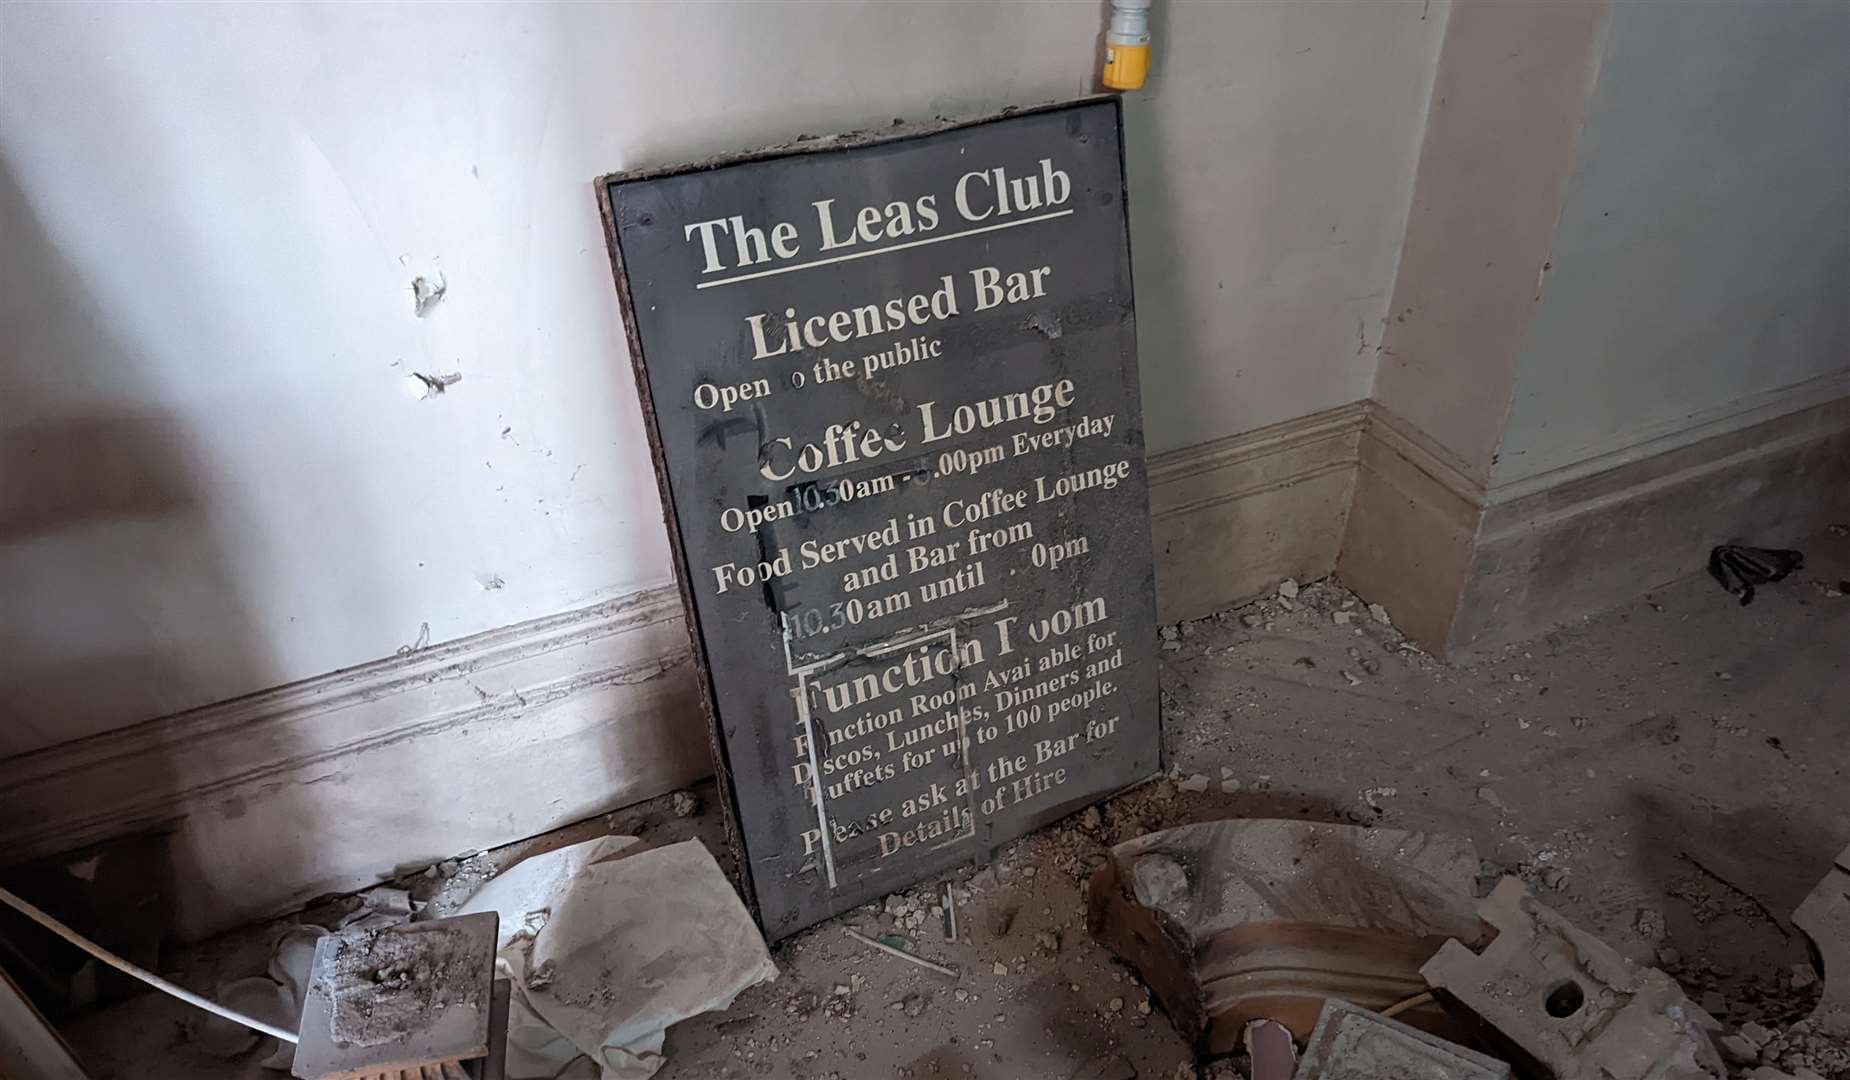 Remnants from a previous era can still be found inside the Leas Pavilion